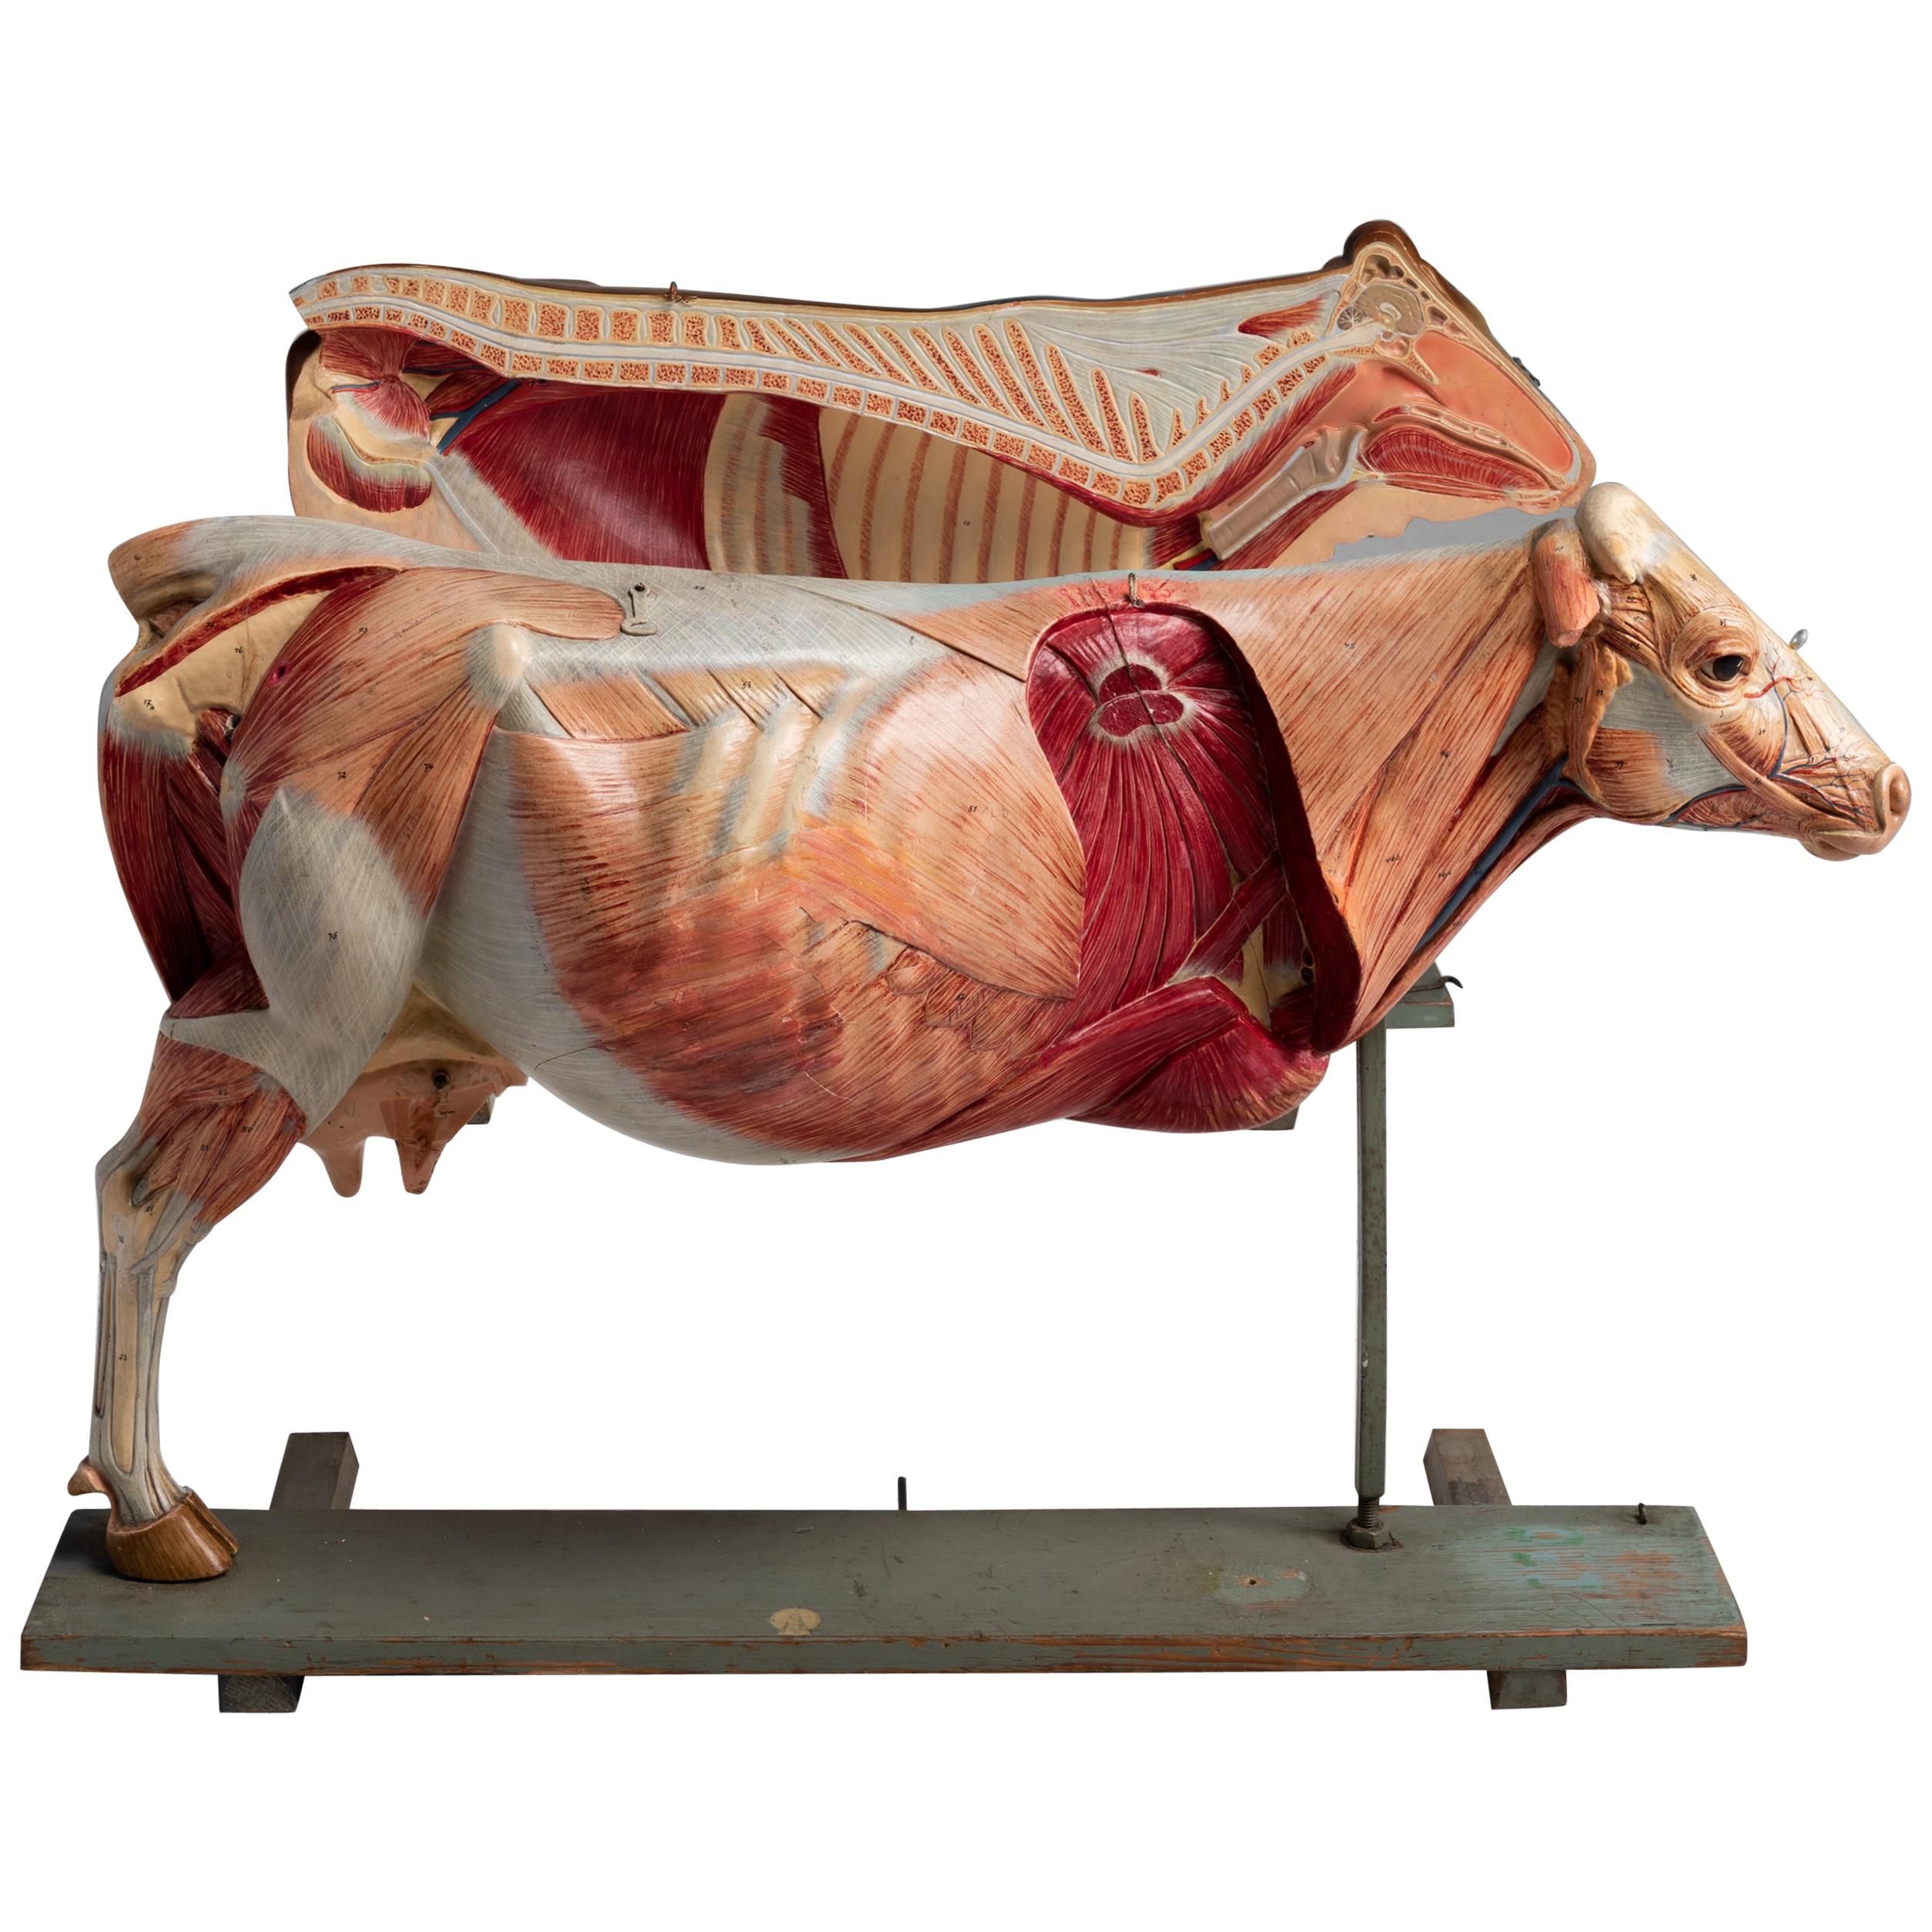 Anatomical Model of a Cow